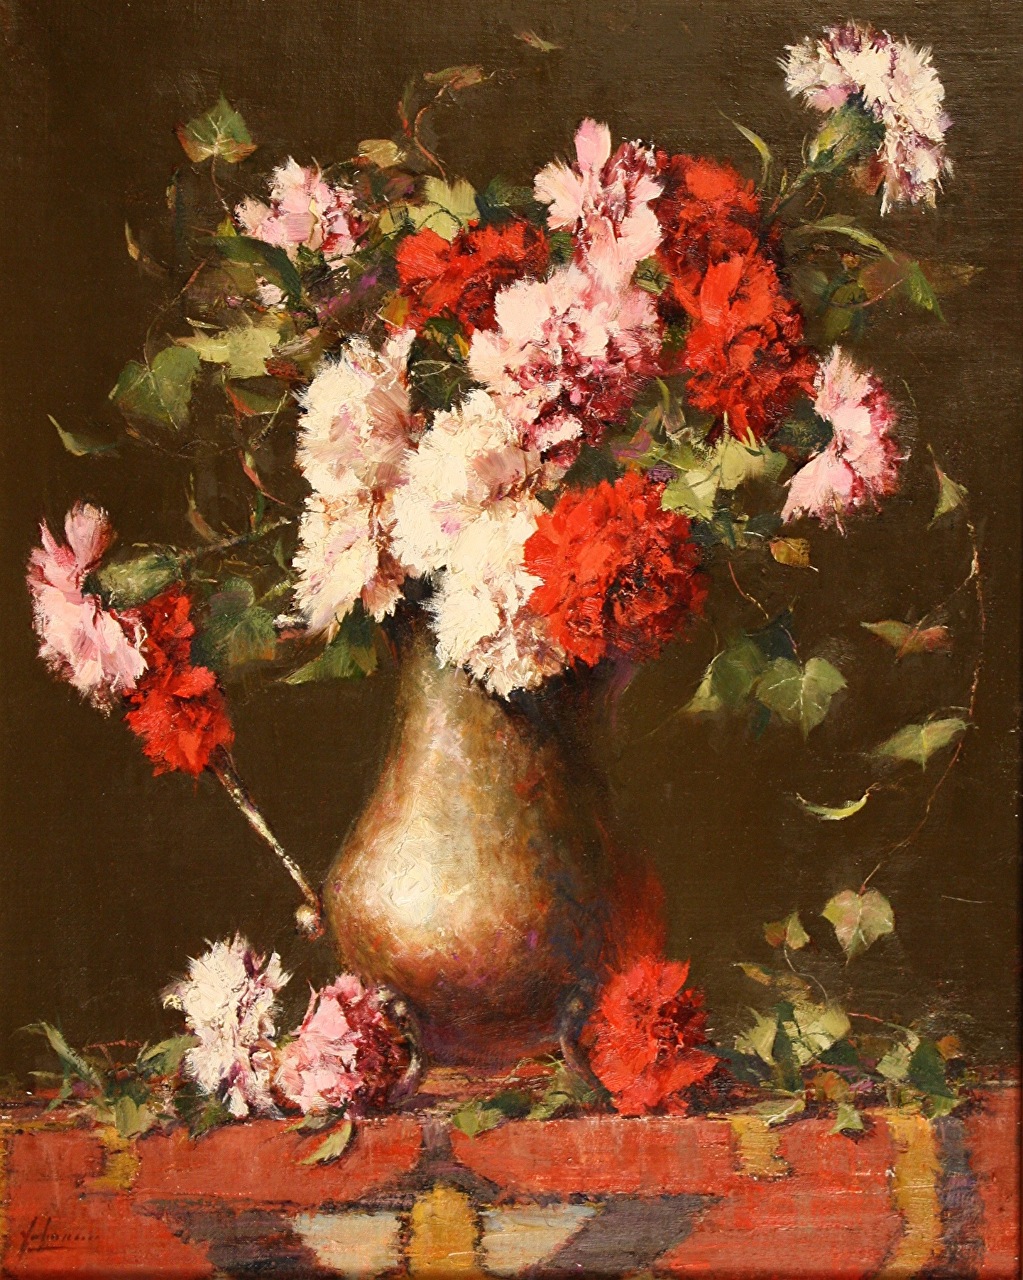 Painting with oil - still life of carnations and ivy